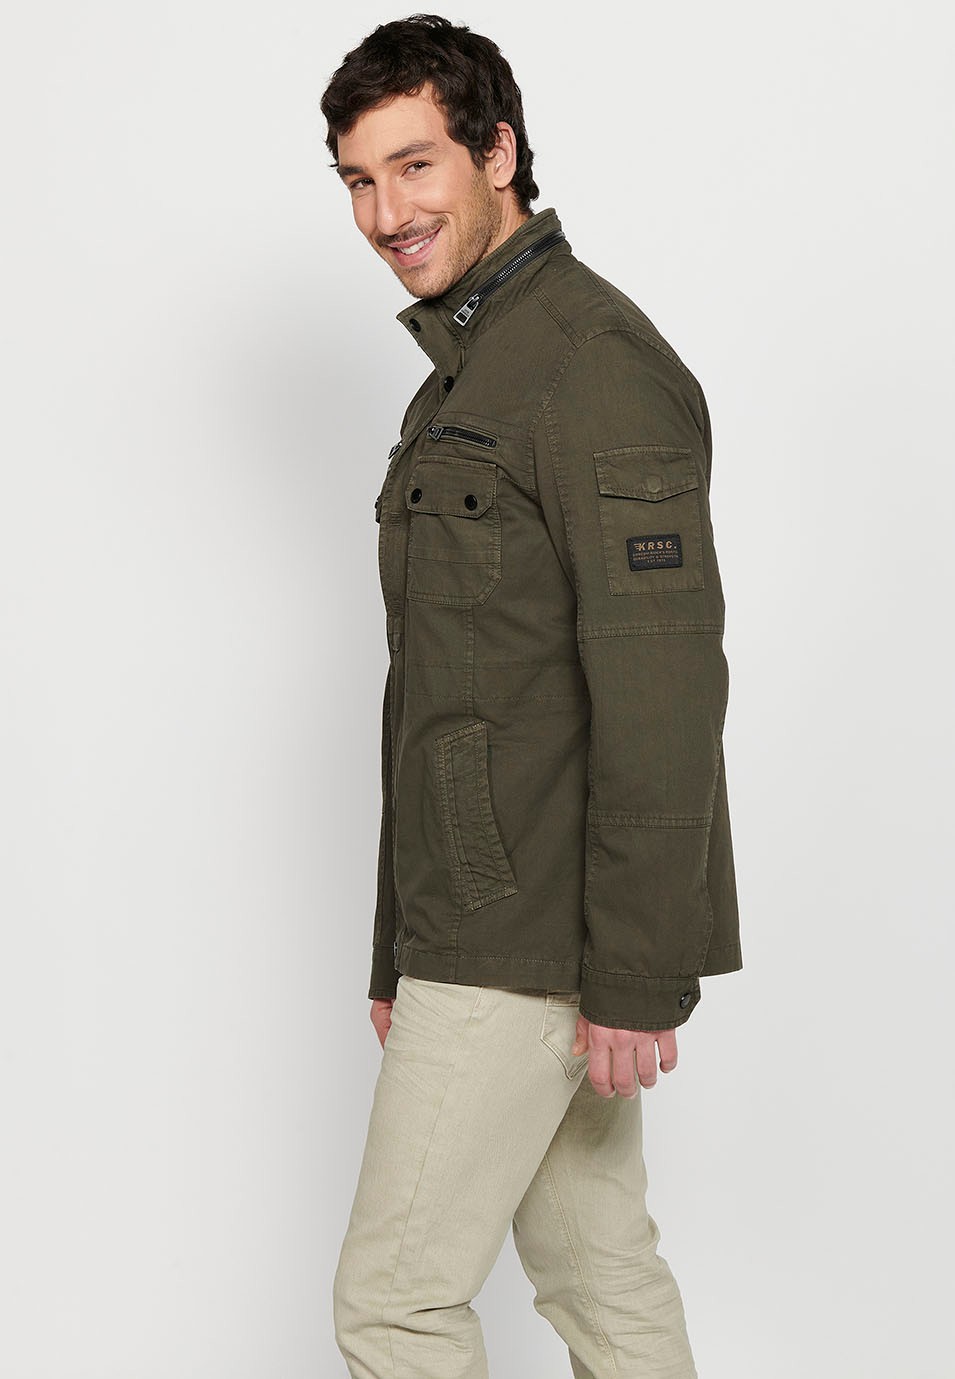 Long Jacket with Zipper Front Closure and Lapel with Stand Collar and Flap Pockets in Olive Color for Men 6